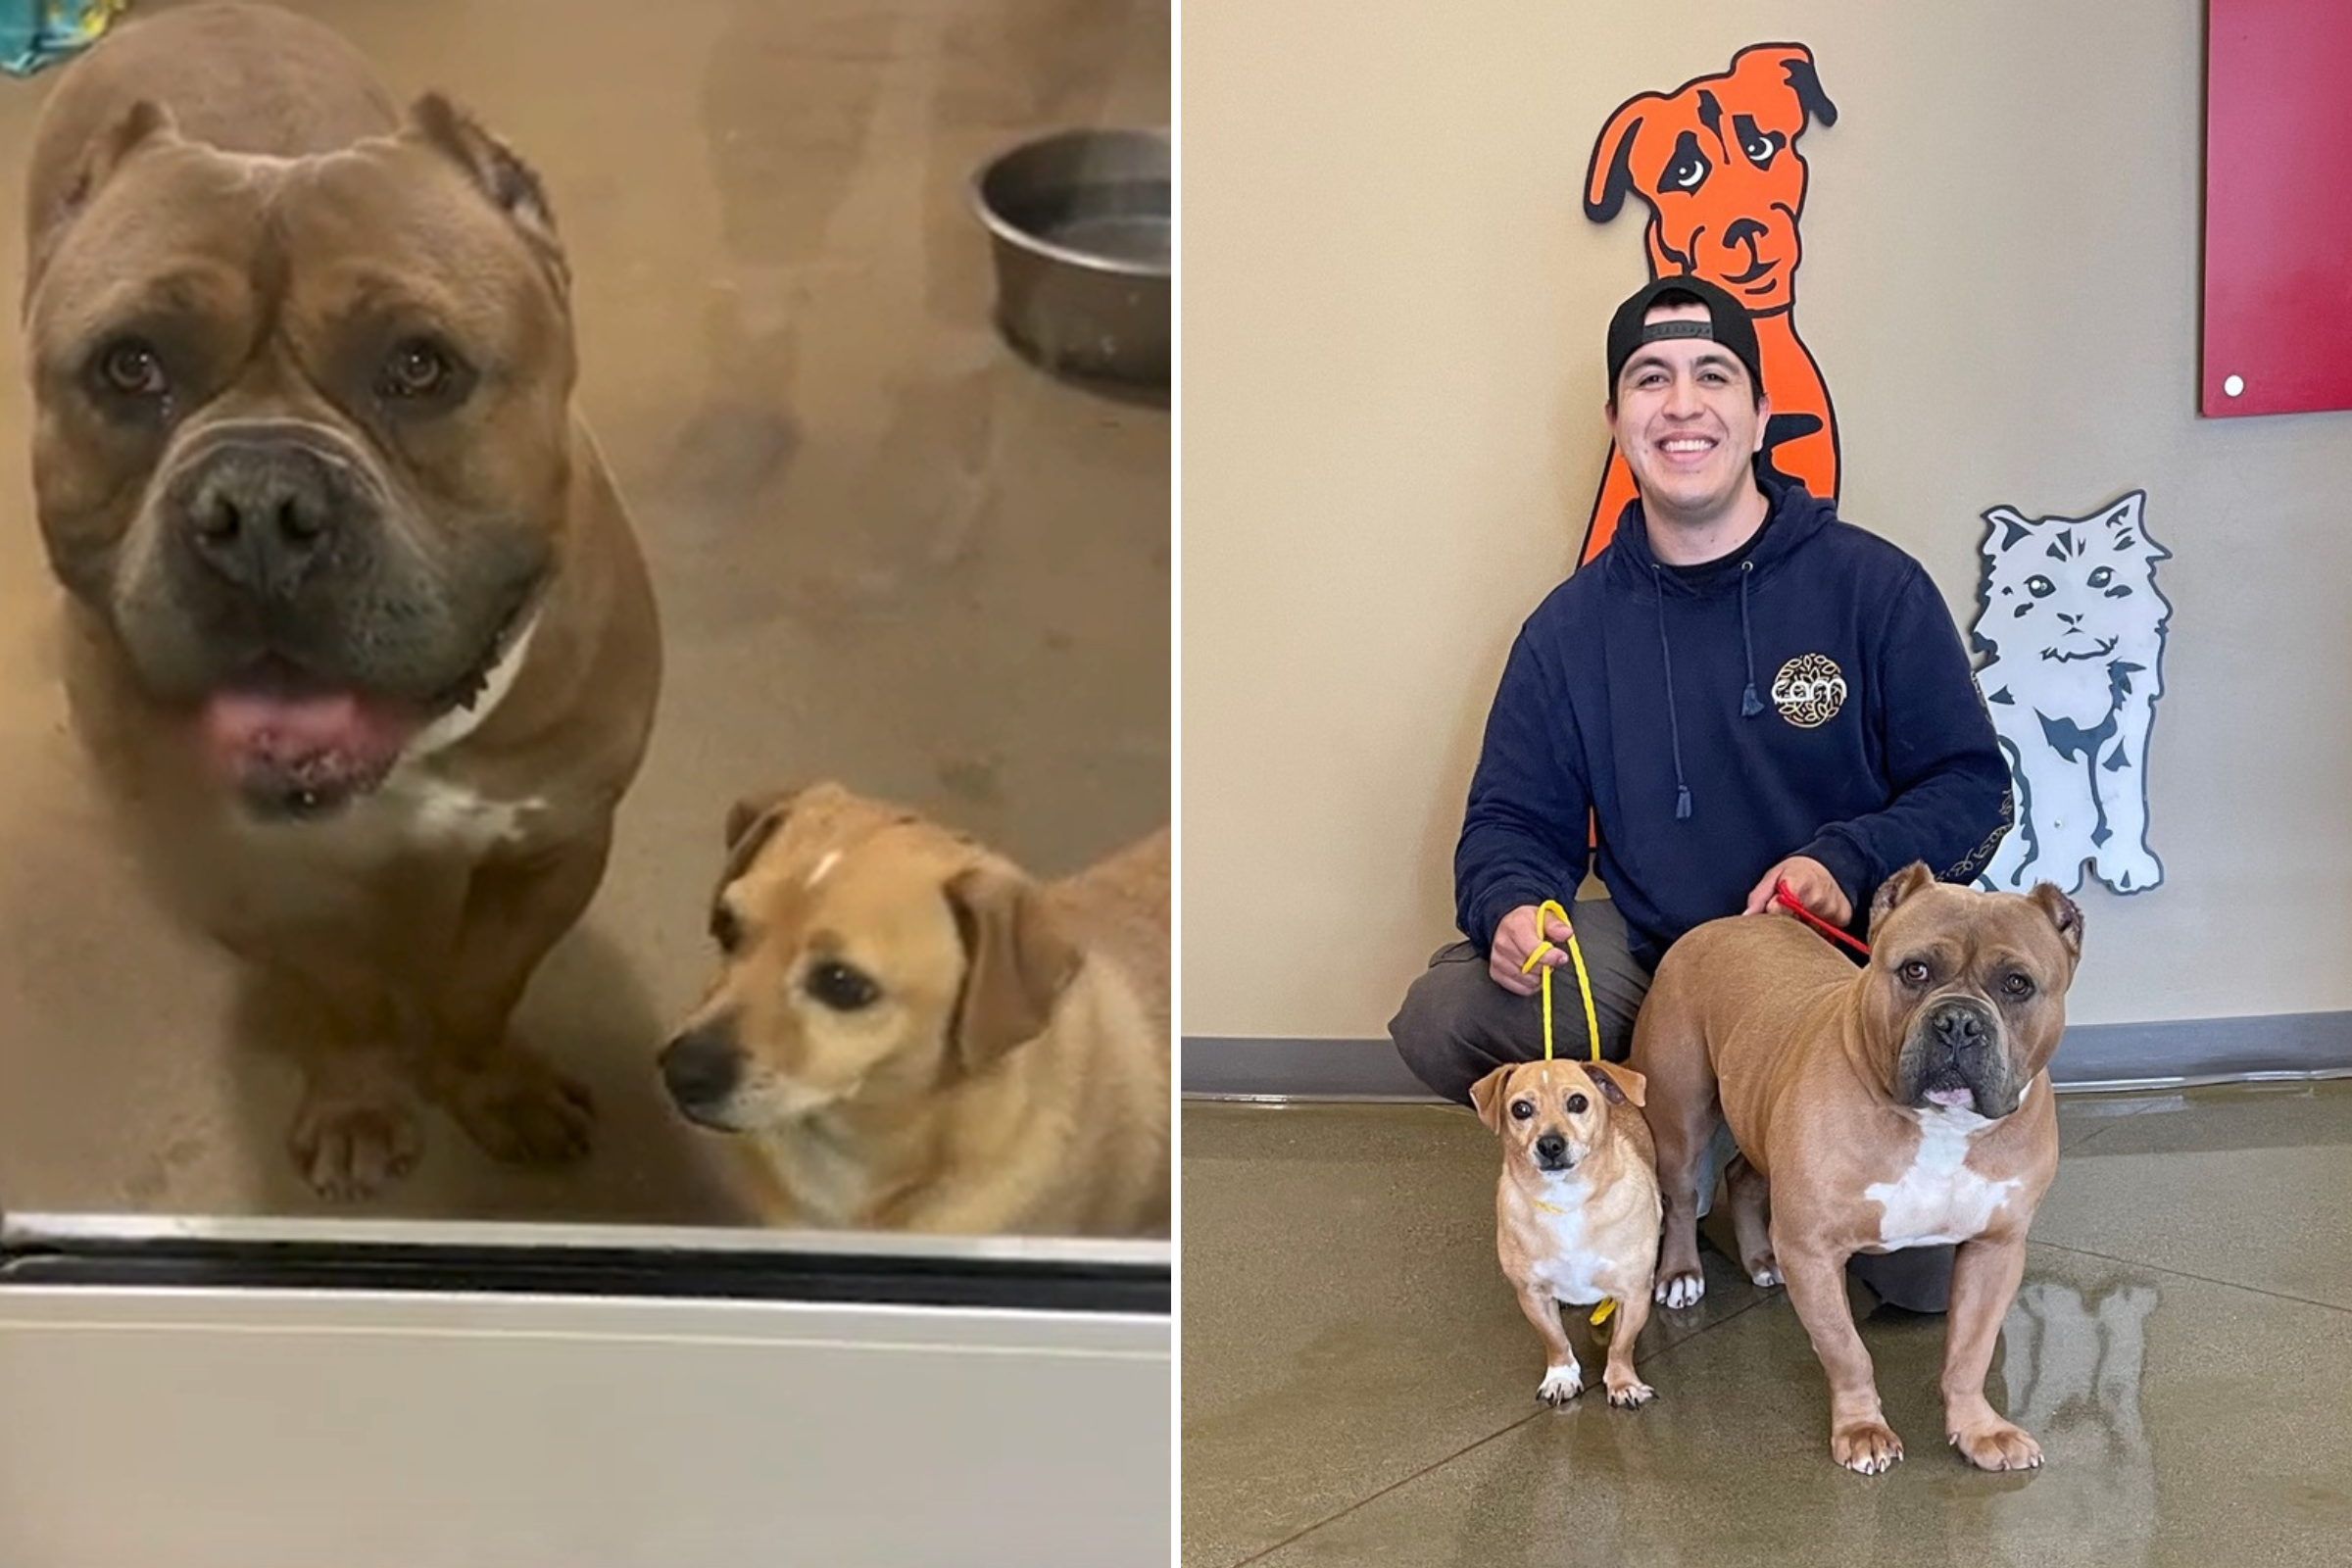 Dog rescue pleas for unexpected besties to be adopted as one, and it worked